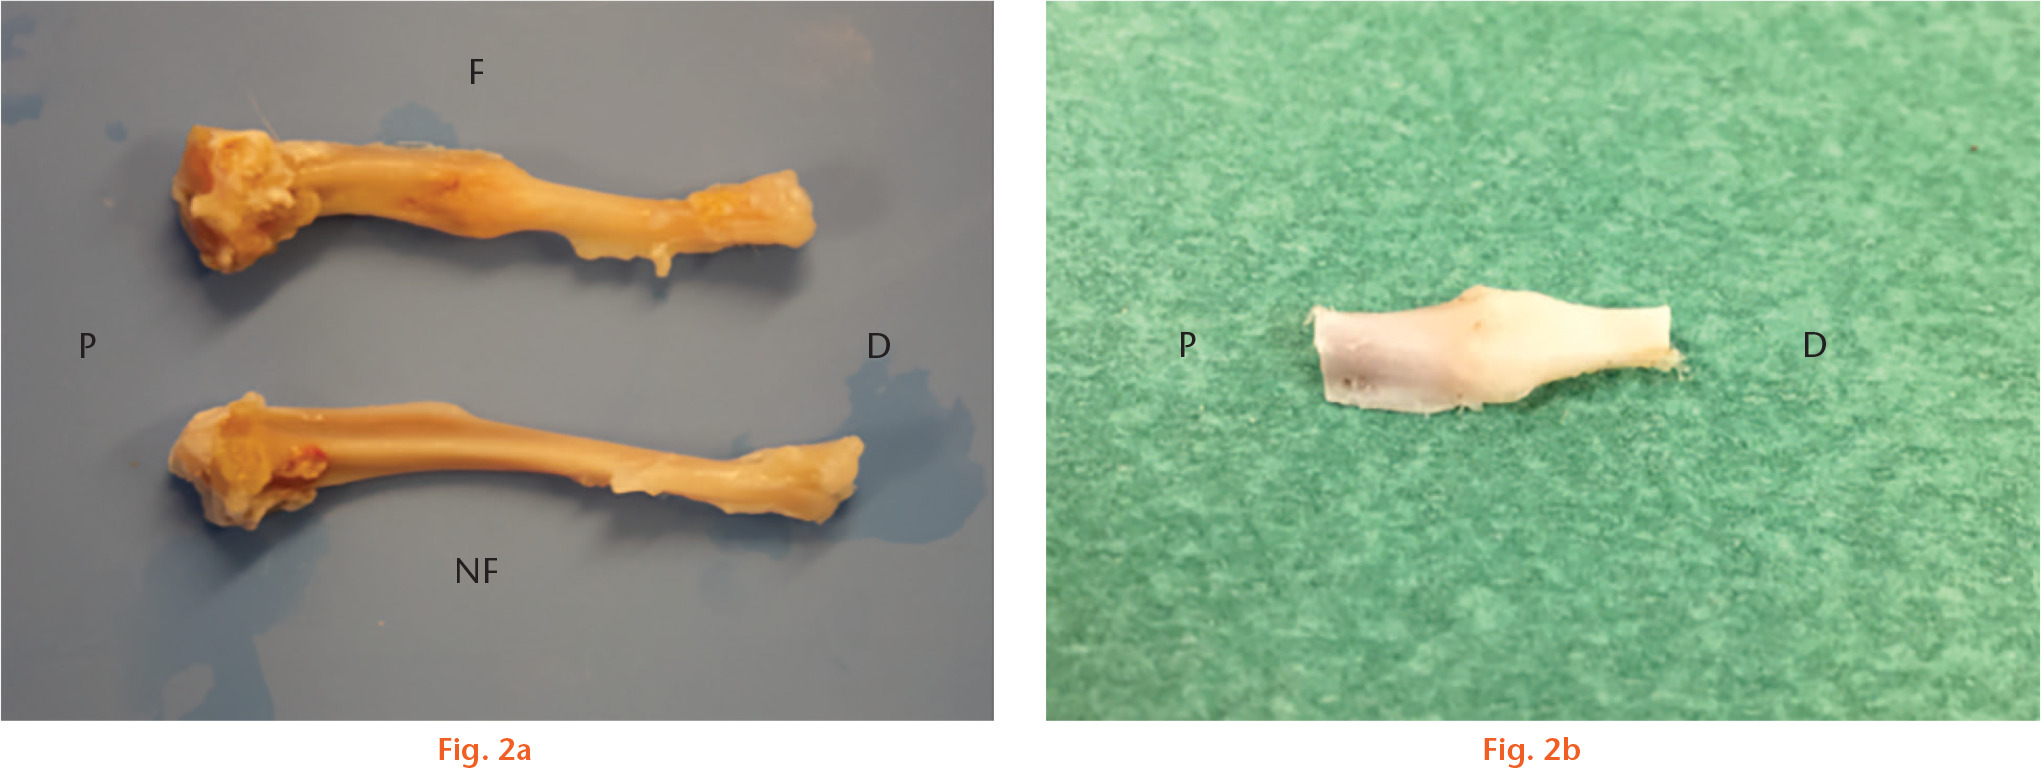 Fig. 2 
            Lateral-view photographs of tibia ex vivo at four weeks of healing. Orientation is proximal (P) to distal (D). a) Fractured (F) and non-fractured (NF) tibia from a specimen (‘parecoxib immediate’ (Pi) group) prepared for biomechanical tests. b) Segment of middle tibia containing callus in a specimen (control group) fixed for histological analysis.
          